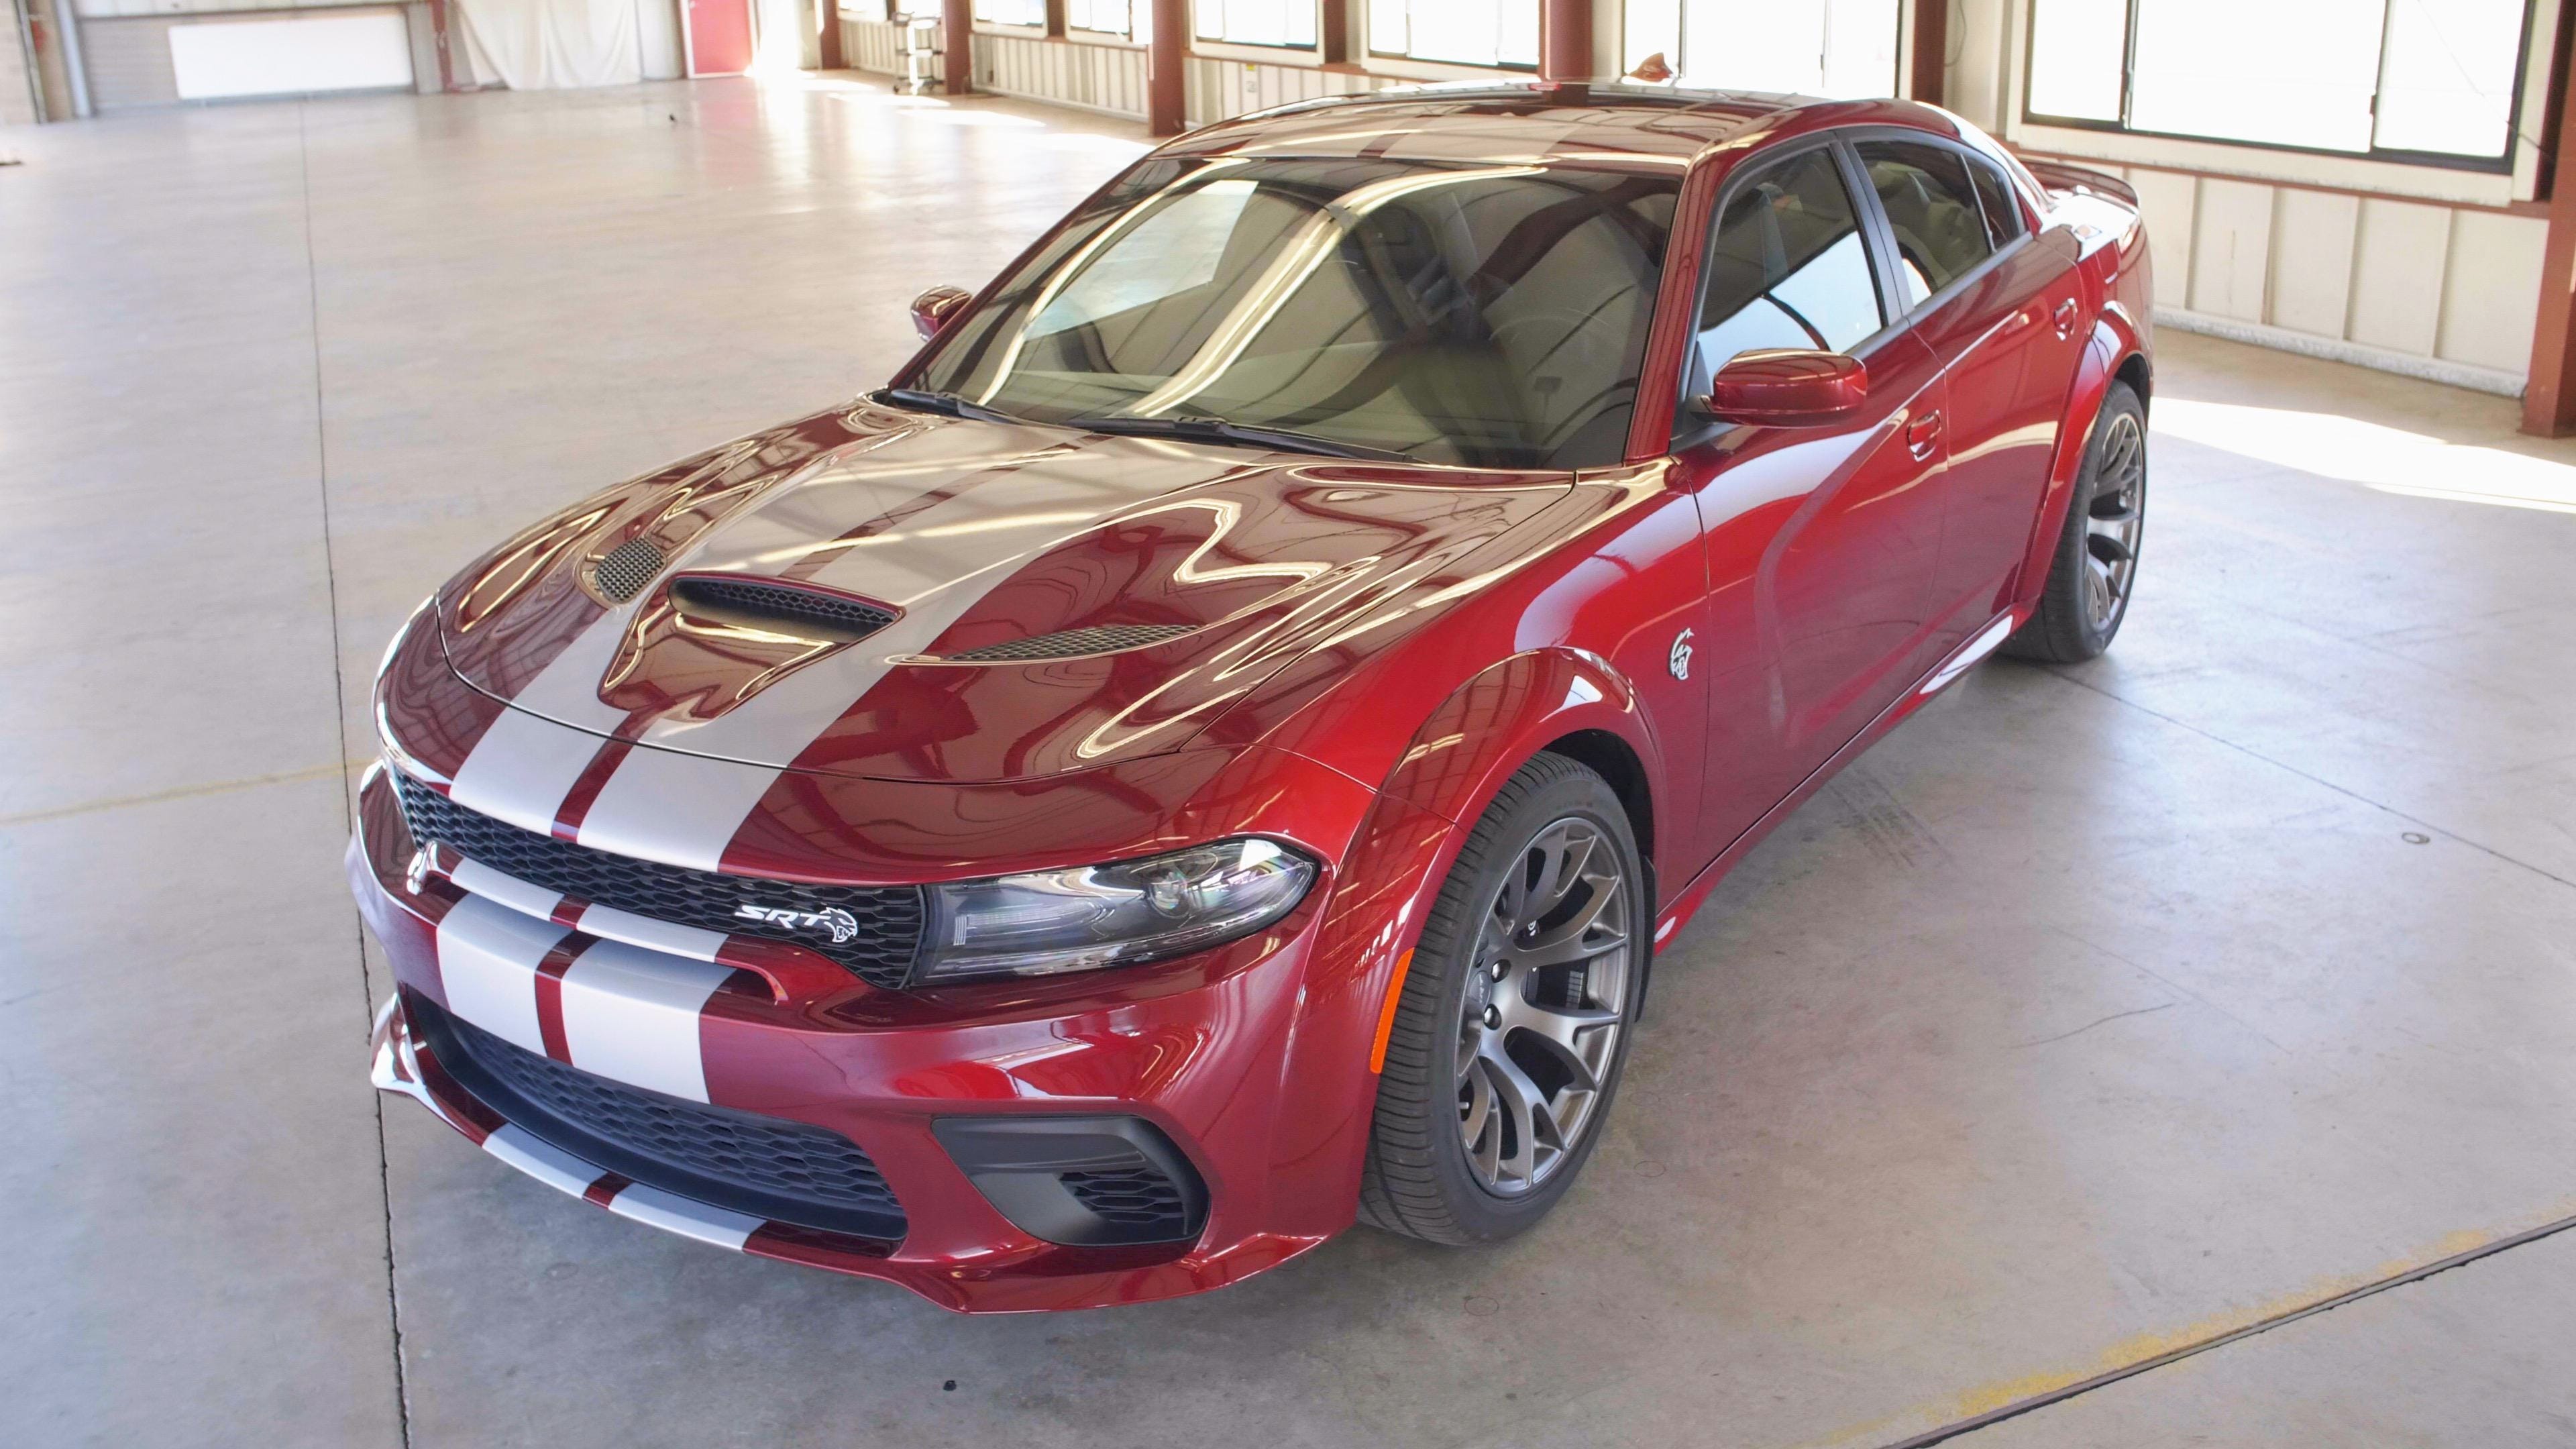 2020 Dodge Charger SRT Hellcat Widebody: A trackable muscle car - Video -  CNET